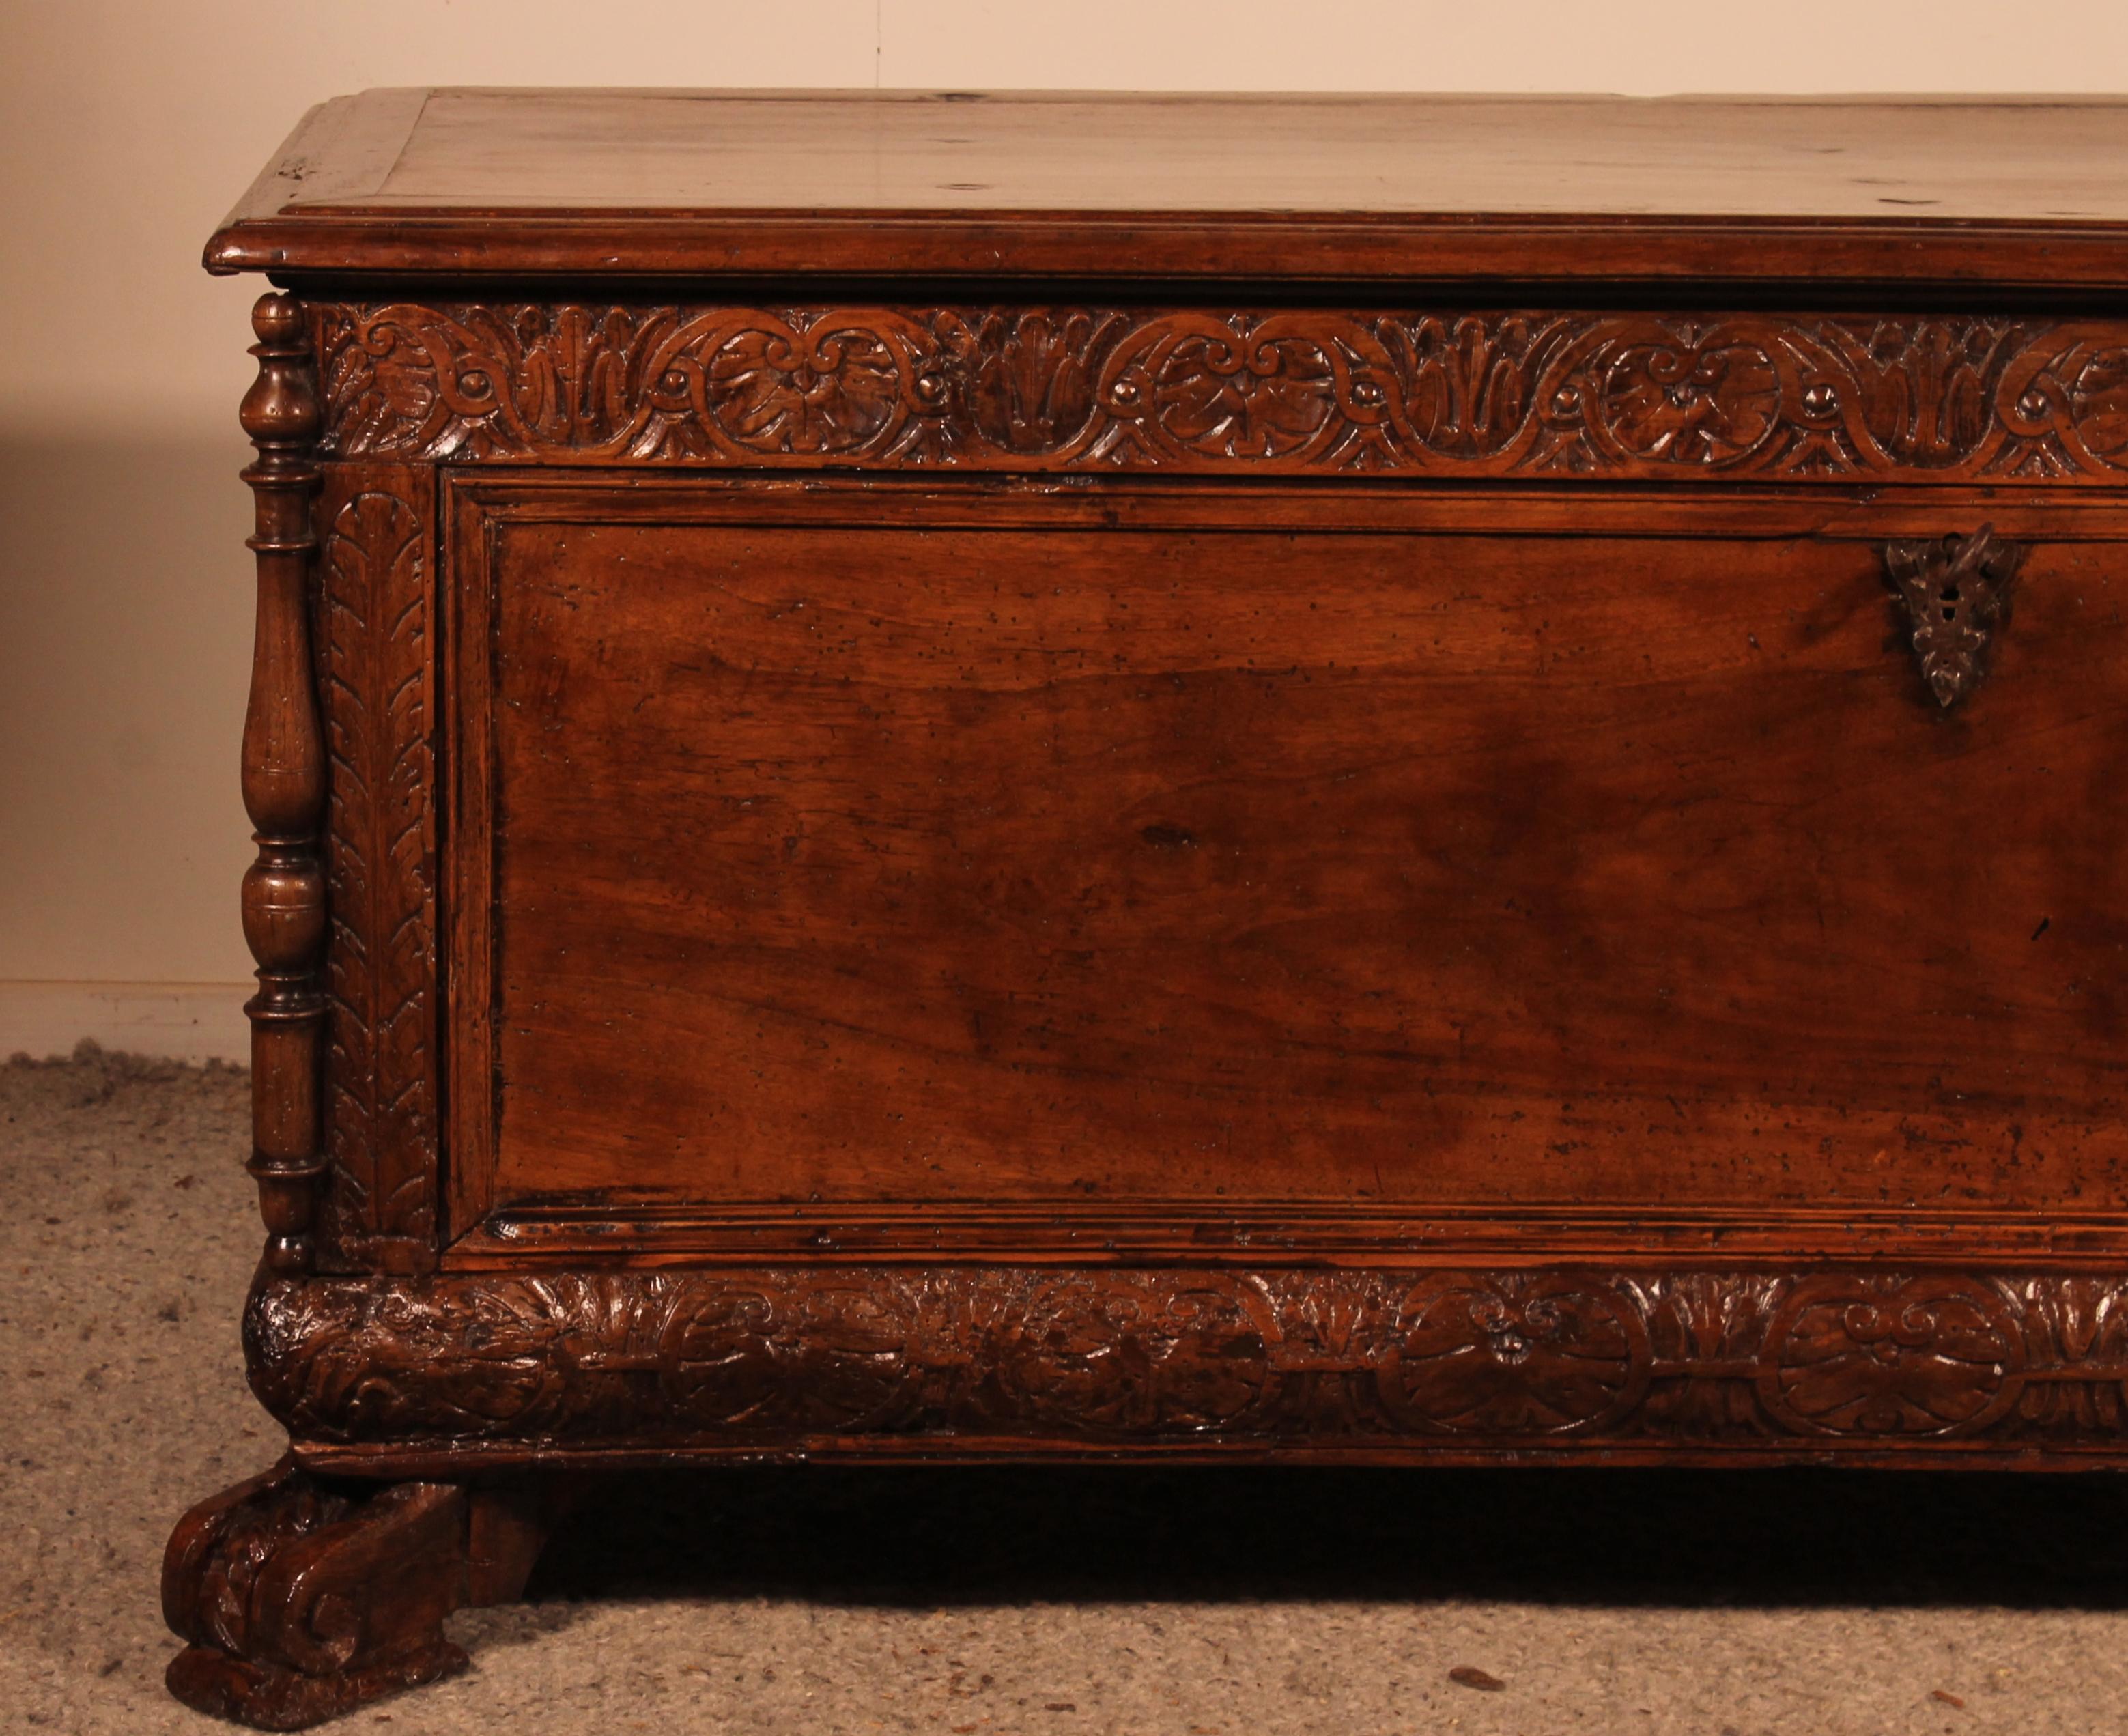 Superb and rare Renaissance chest in walnut from the 16th century
Very beautiful chest from the French Renaissance in carved walnut
Superb facade and sides in carved walnut
It has its original carrying handles
Entrance and lock of origins as